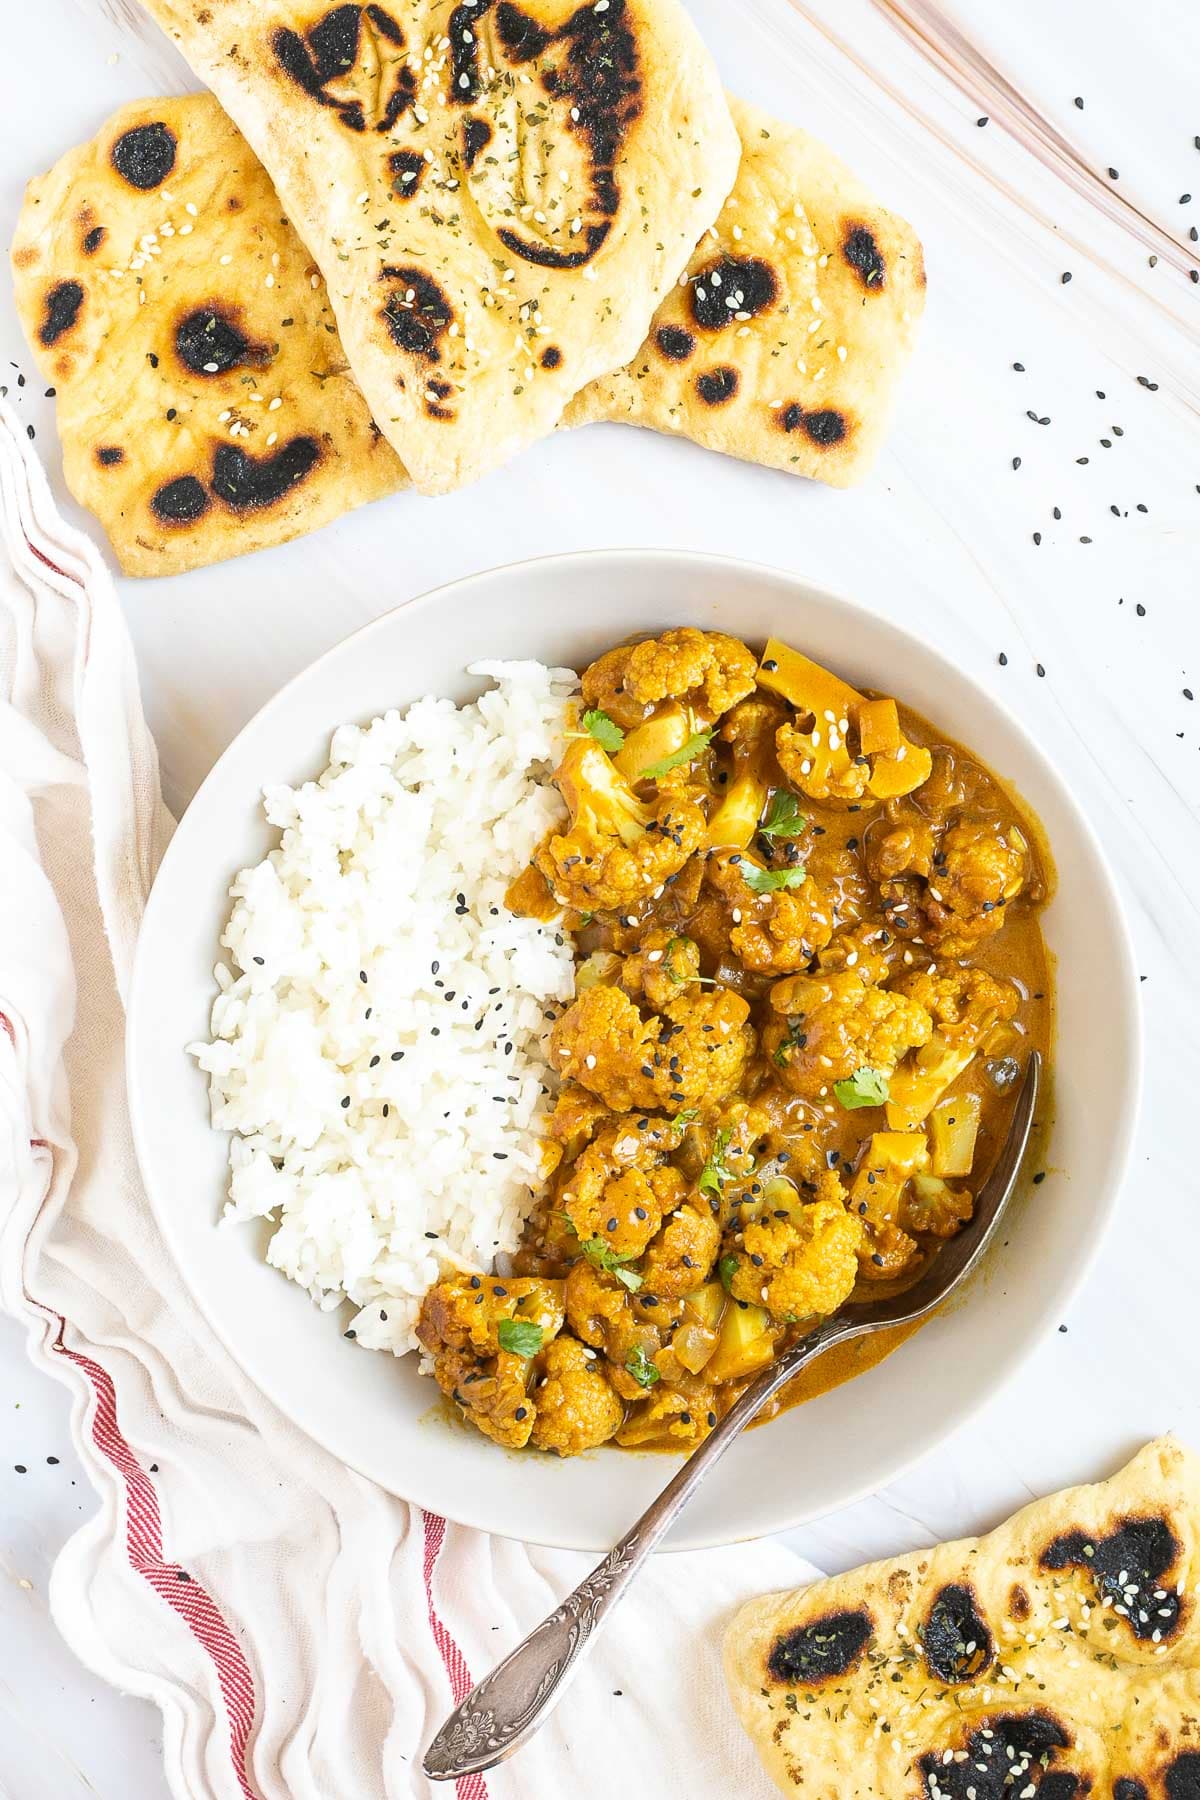 A white plate with white rice and cauliflower florets in a creamy orange sauce sprinkled freshly chopped cilantro. A spoon is placed inside. Naan bread pieces are next to it.